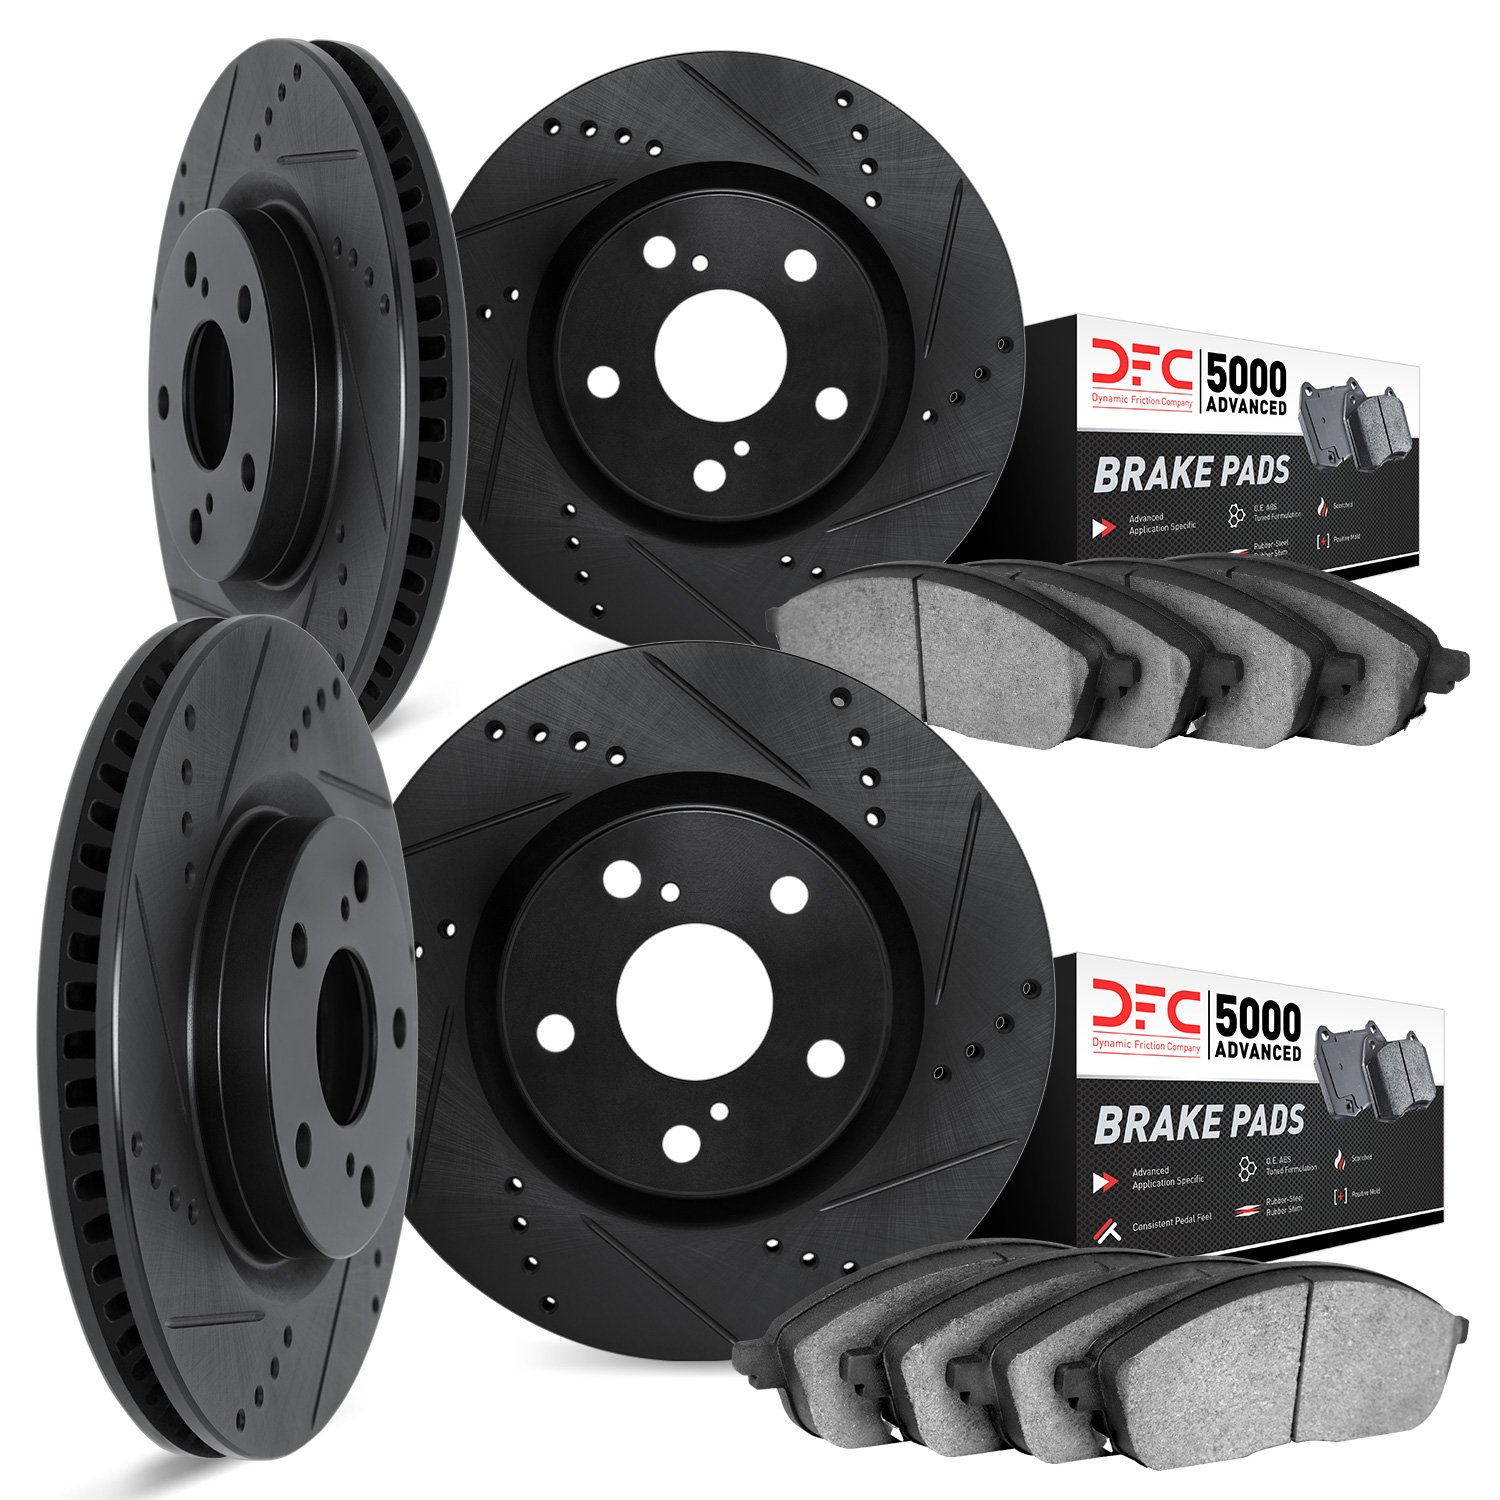 8504-75003 Drilled/Slotted Brake Rotors w/5000 Advanced Brake Pads Kit [Black], 1993-1998 Lexus/Toyota/Scion, Position: Front an